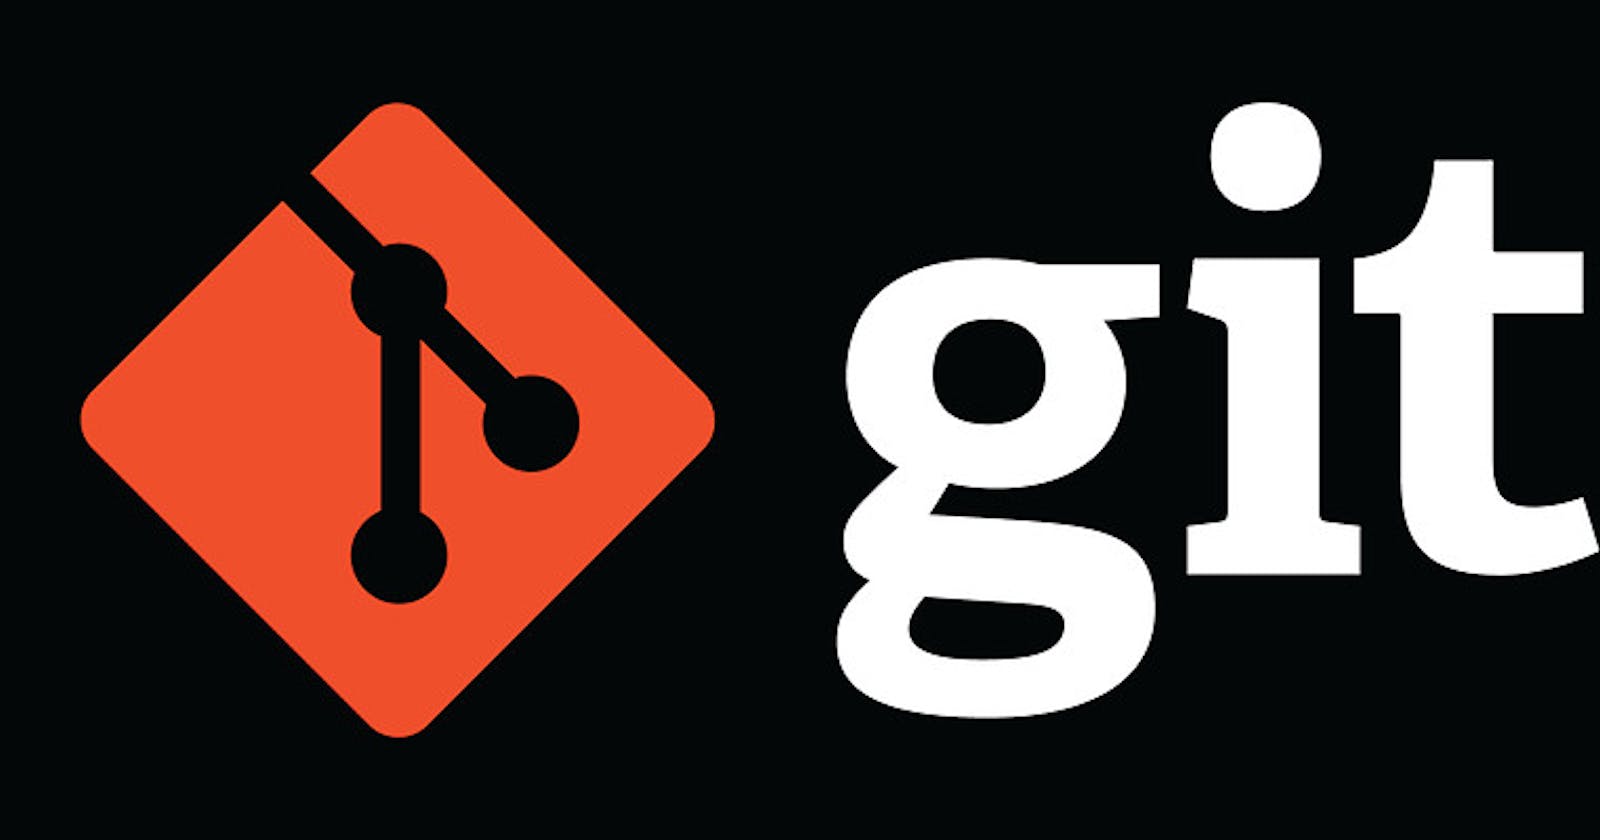 How Does Git work?